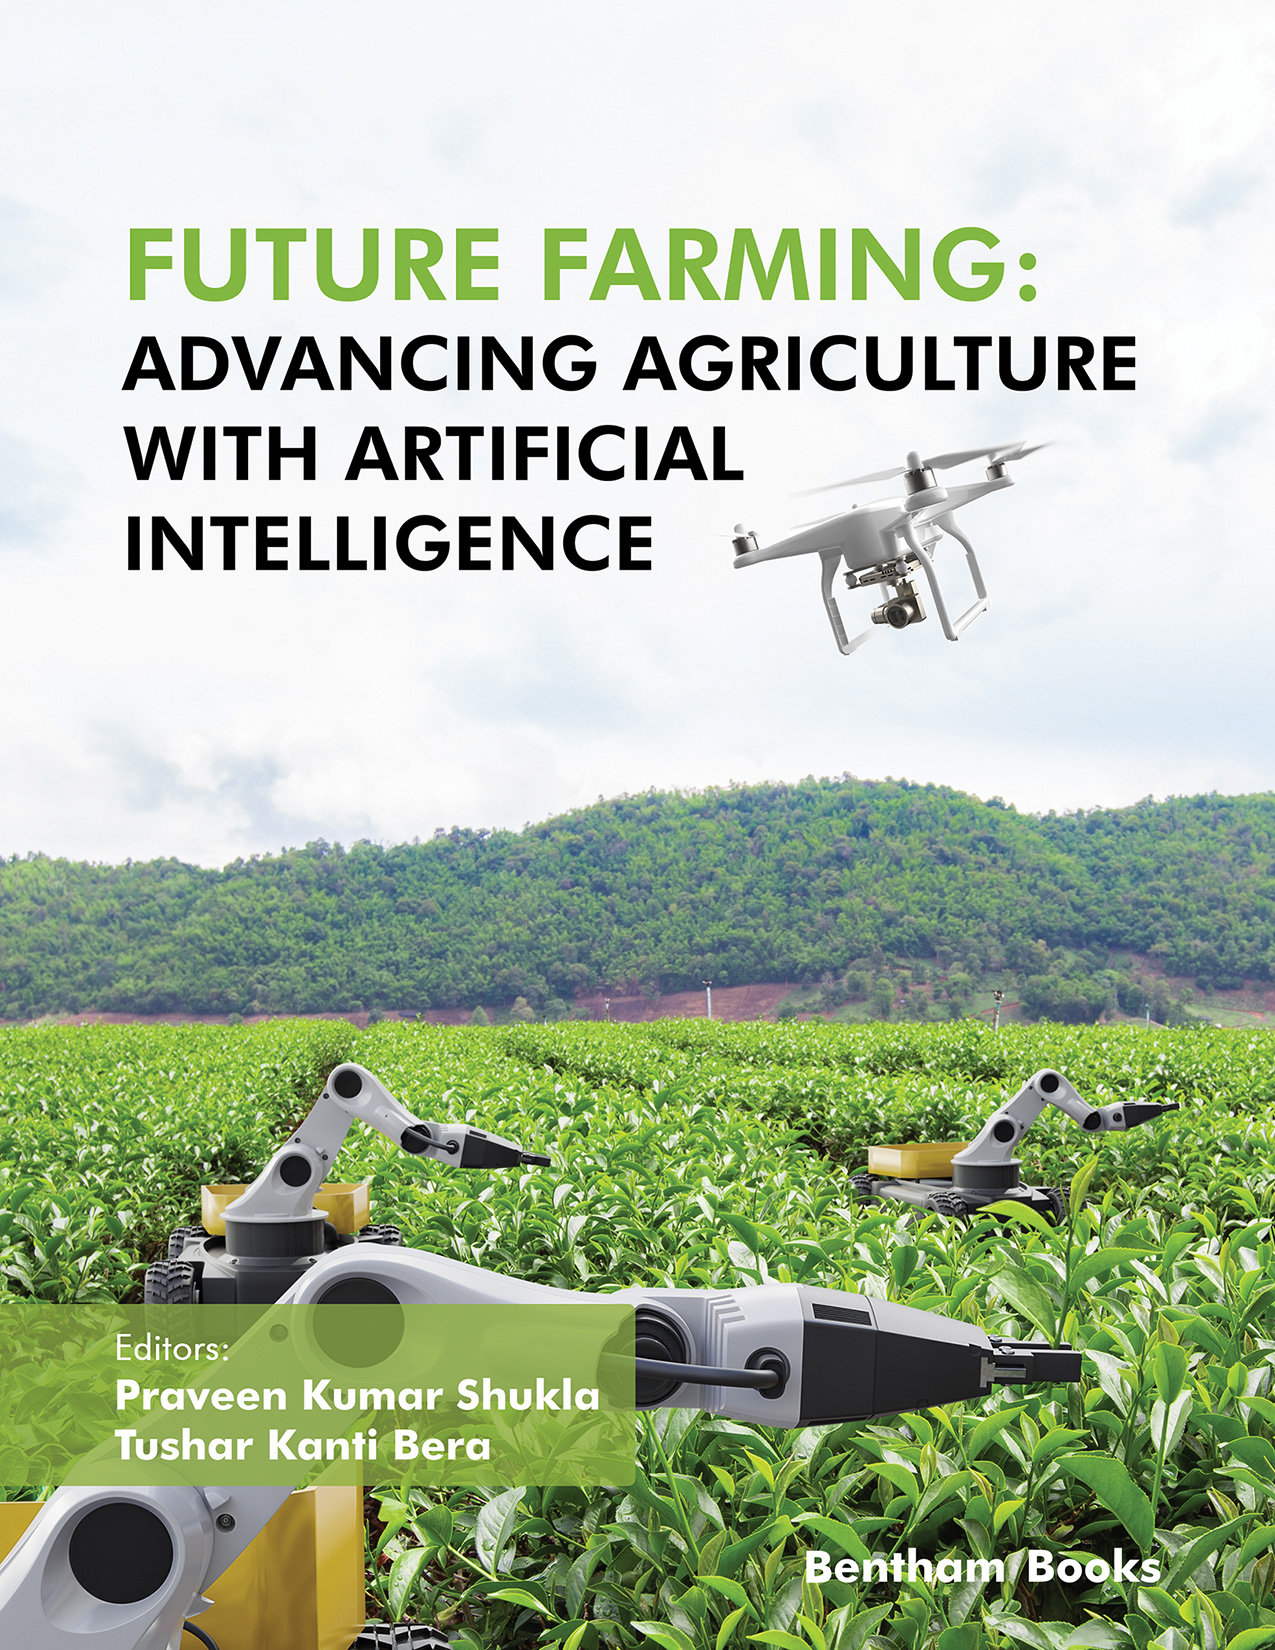 Future Farming: Advancing Agriculture with Artificial Intelligence